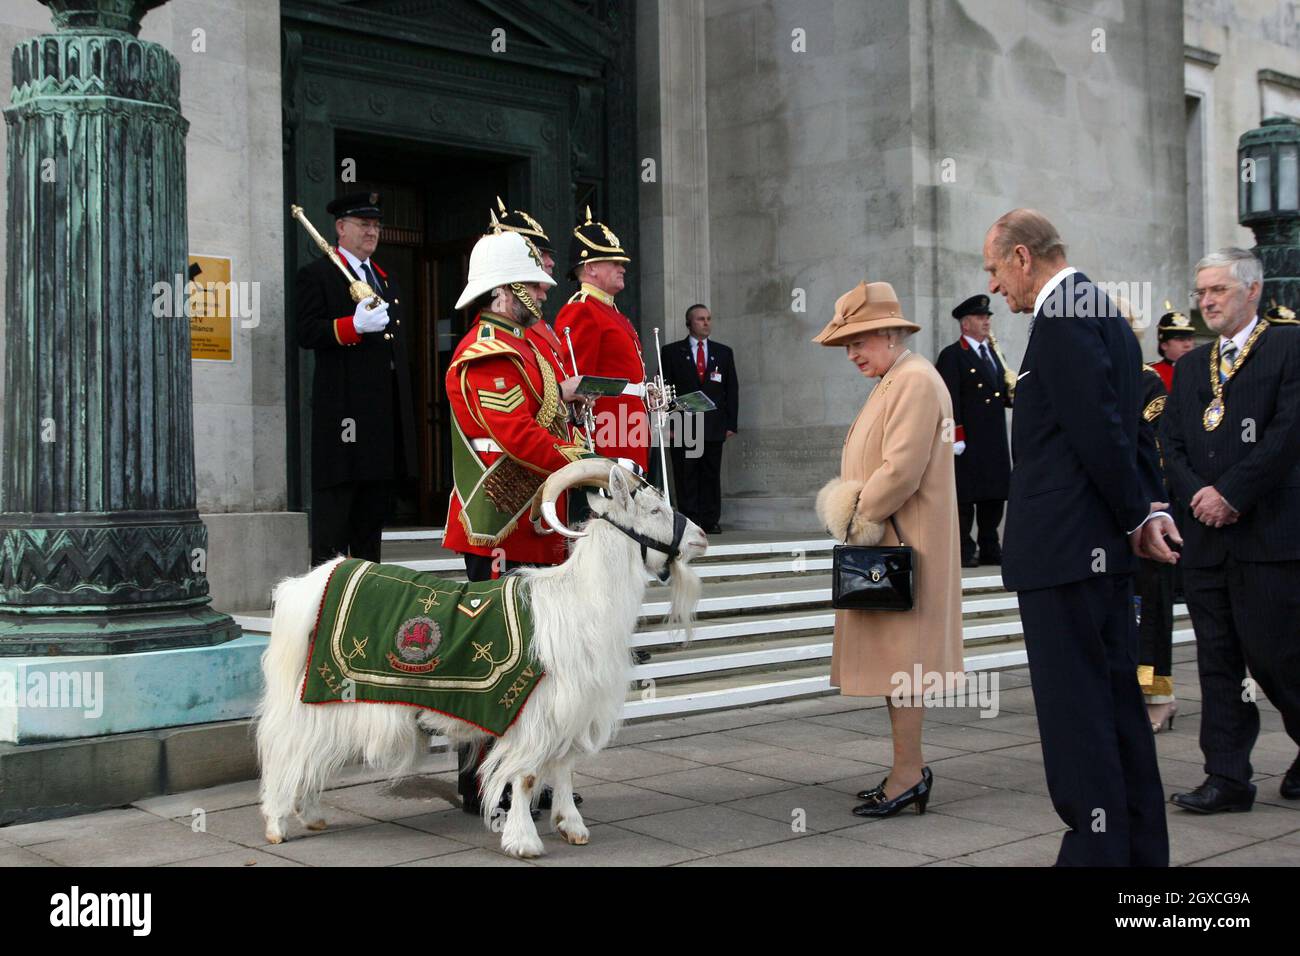 Queen Elizabeth II and Prince Philip, Duke of Edinburgh admire the ceremonial goat as they arrive at the Guildhall in Swansea. Stock Photo